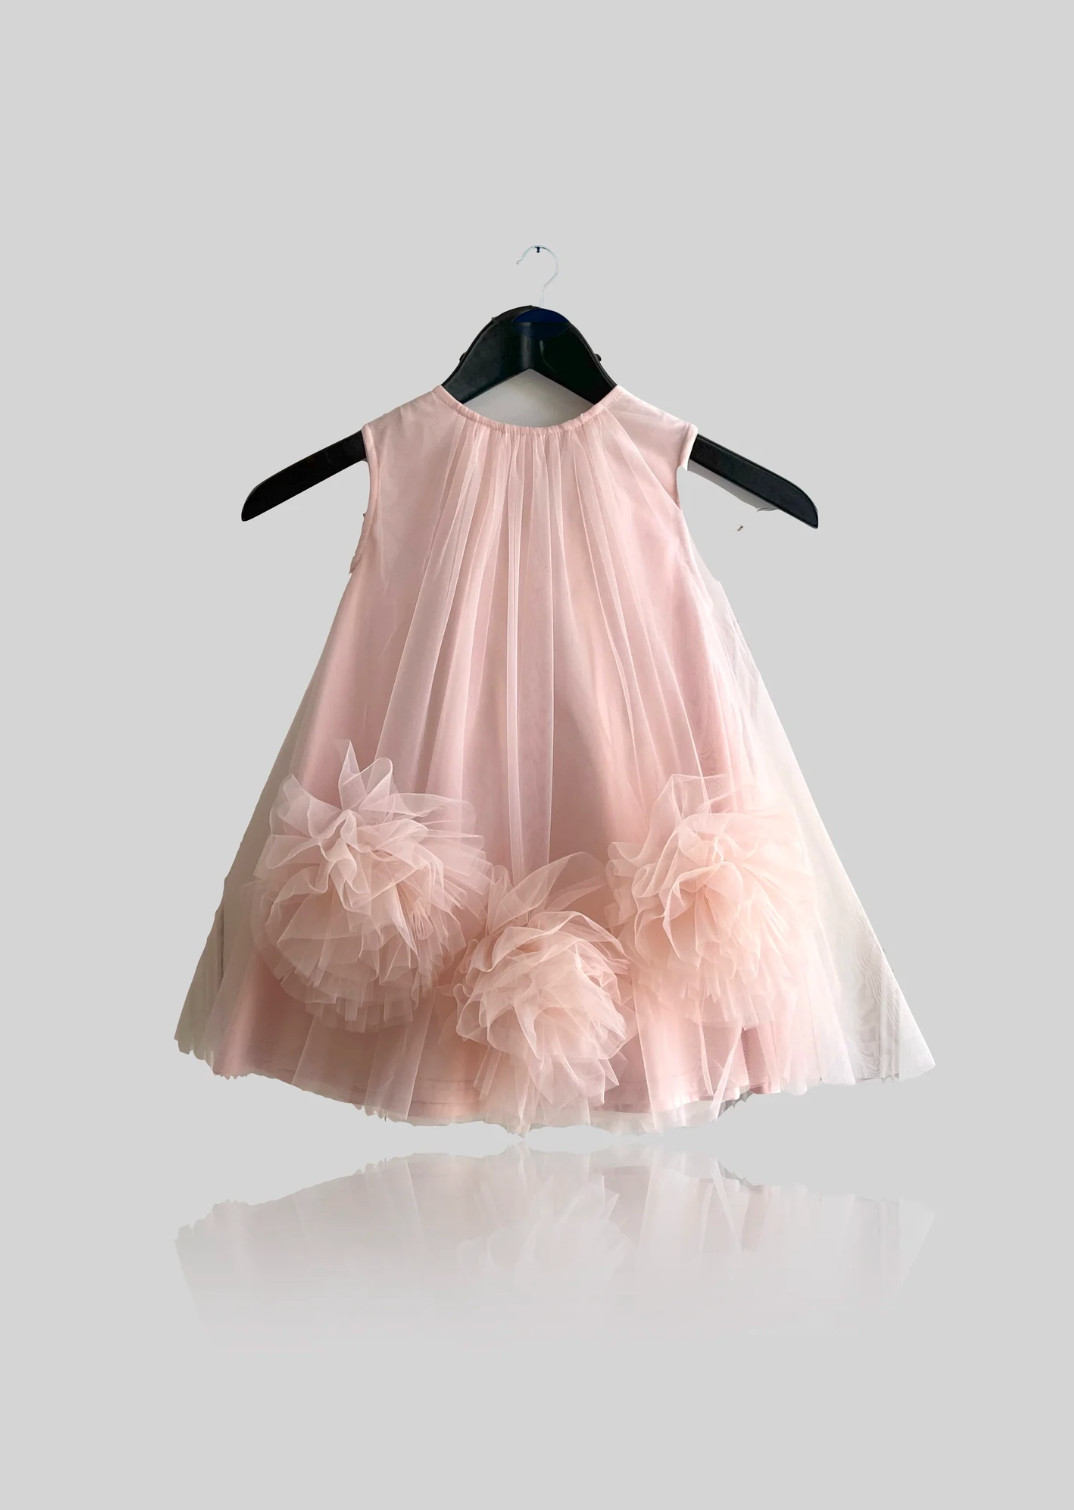 DOLLY by Le Petit Tom ® ROSE TULLE DRESS Dollypink (0-1Y Only)